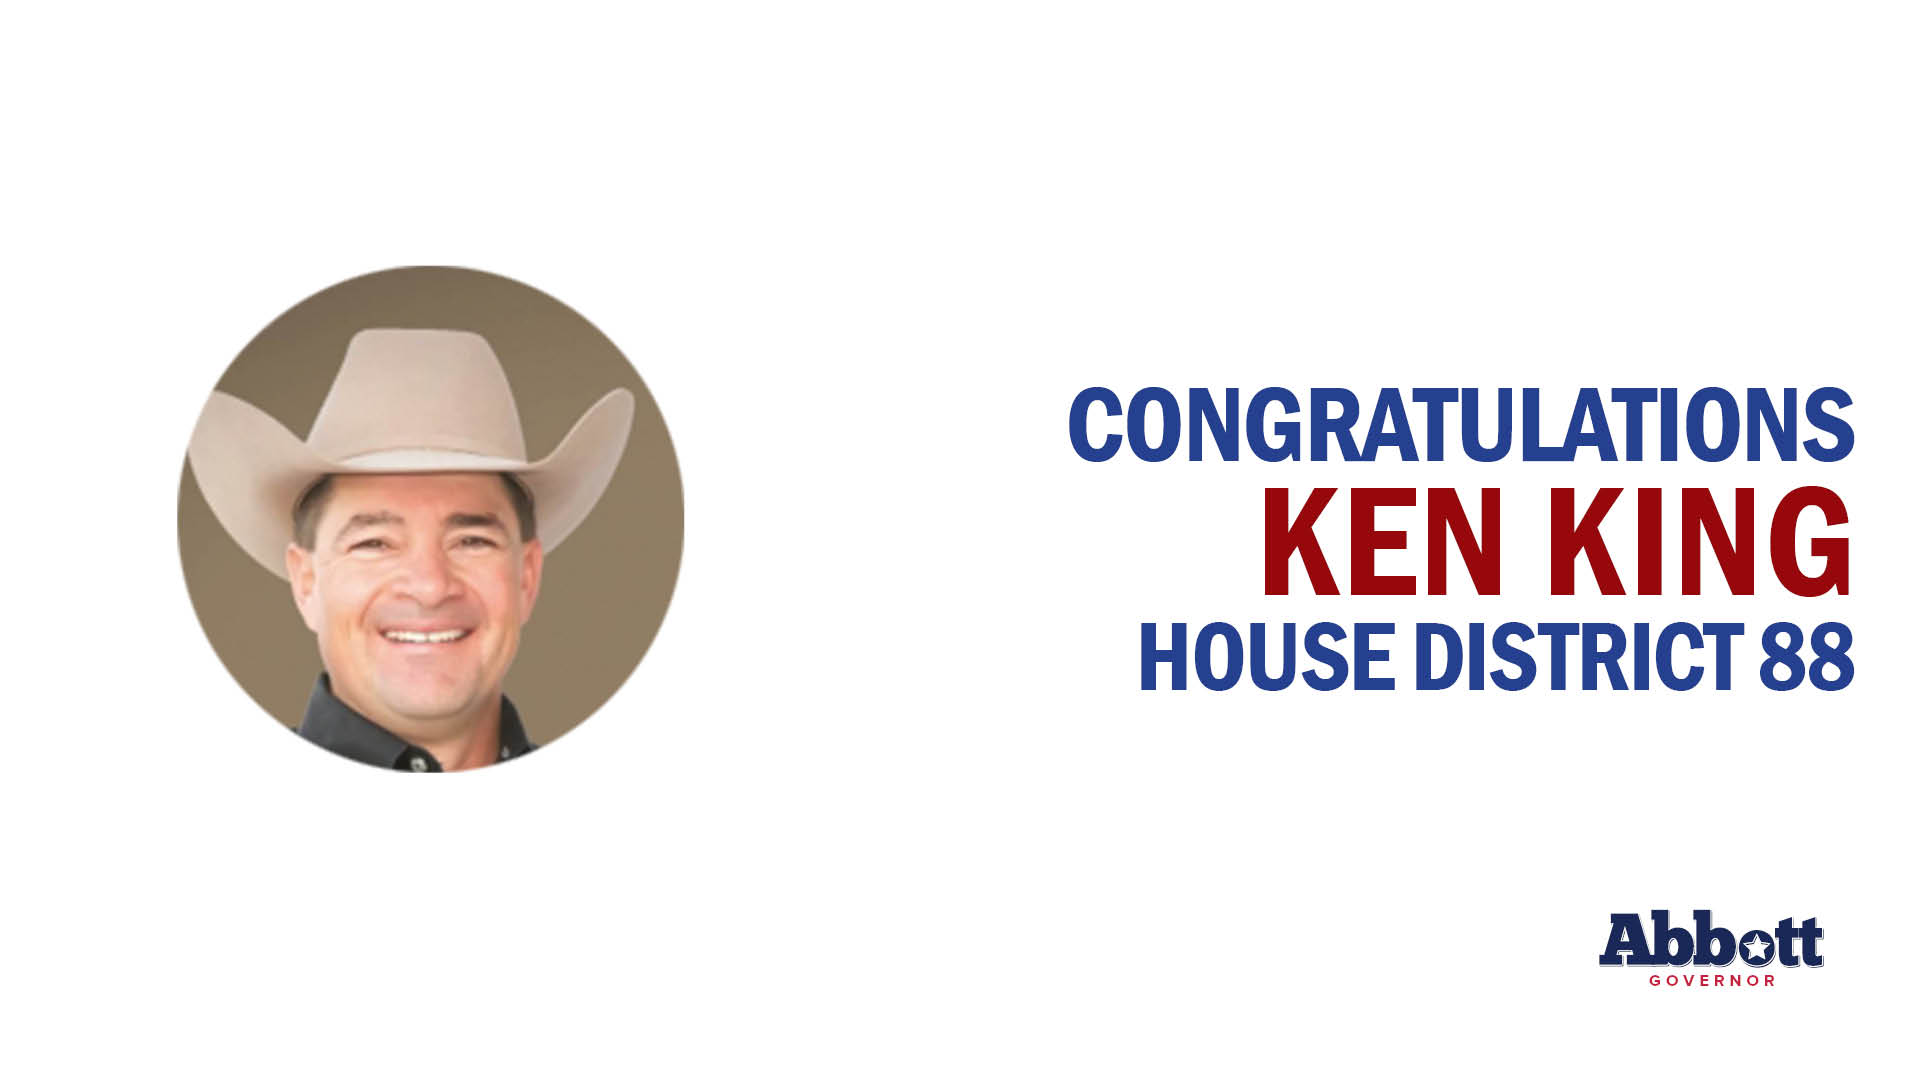 Governor Abbott Statement On Representative Ken King’s Re-Election Victory